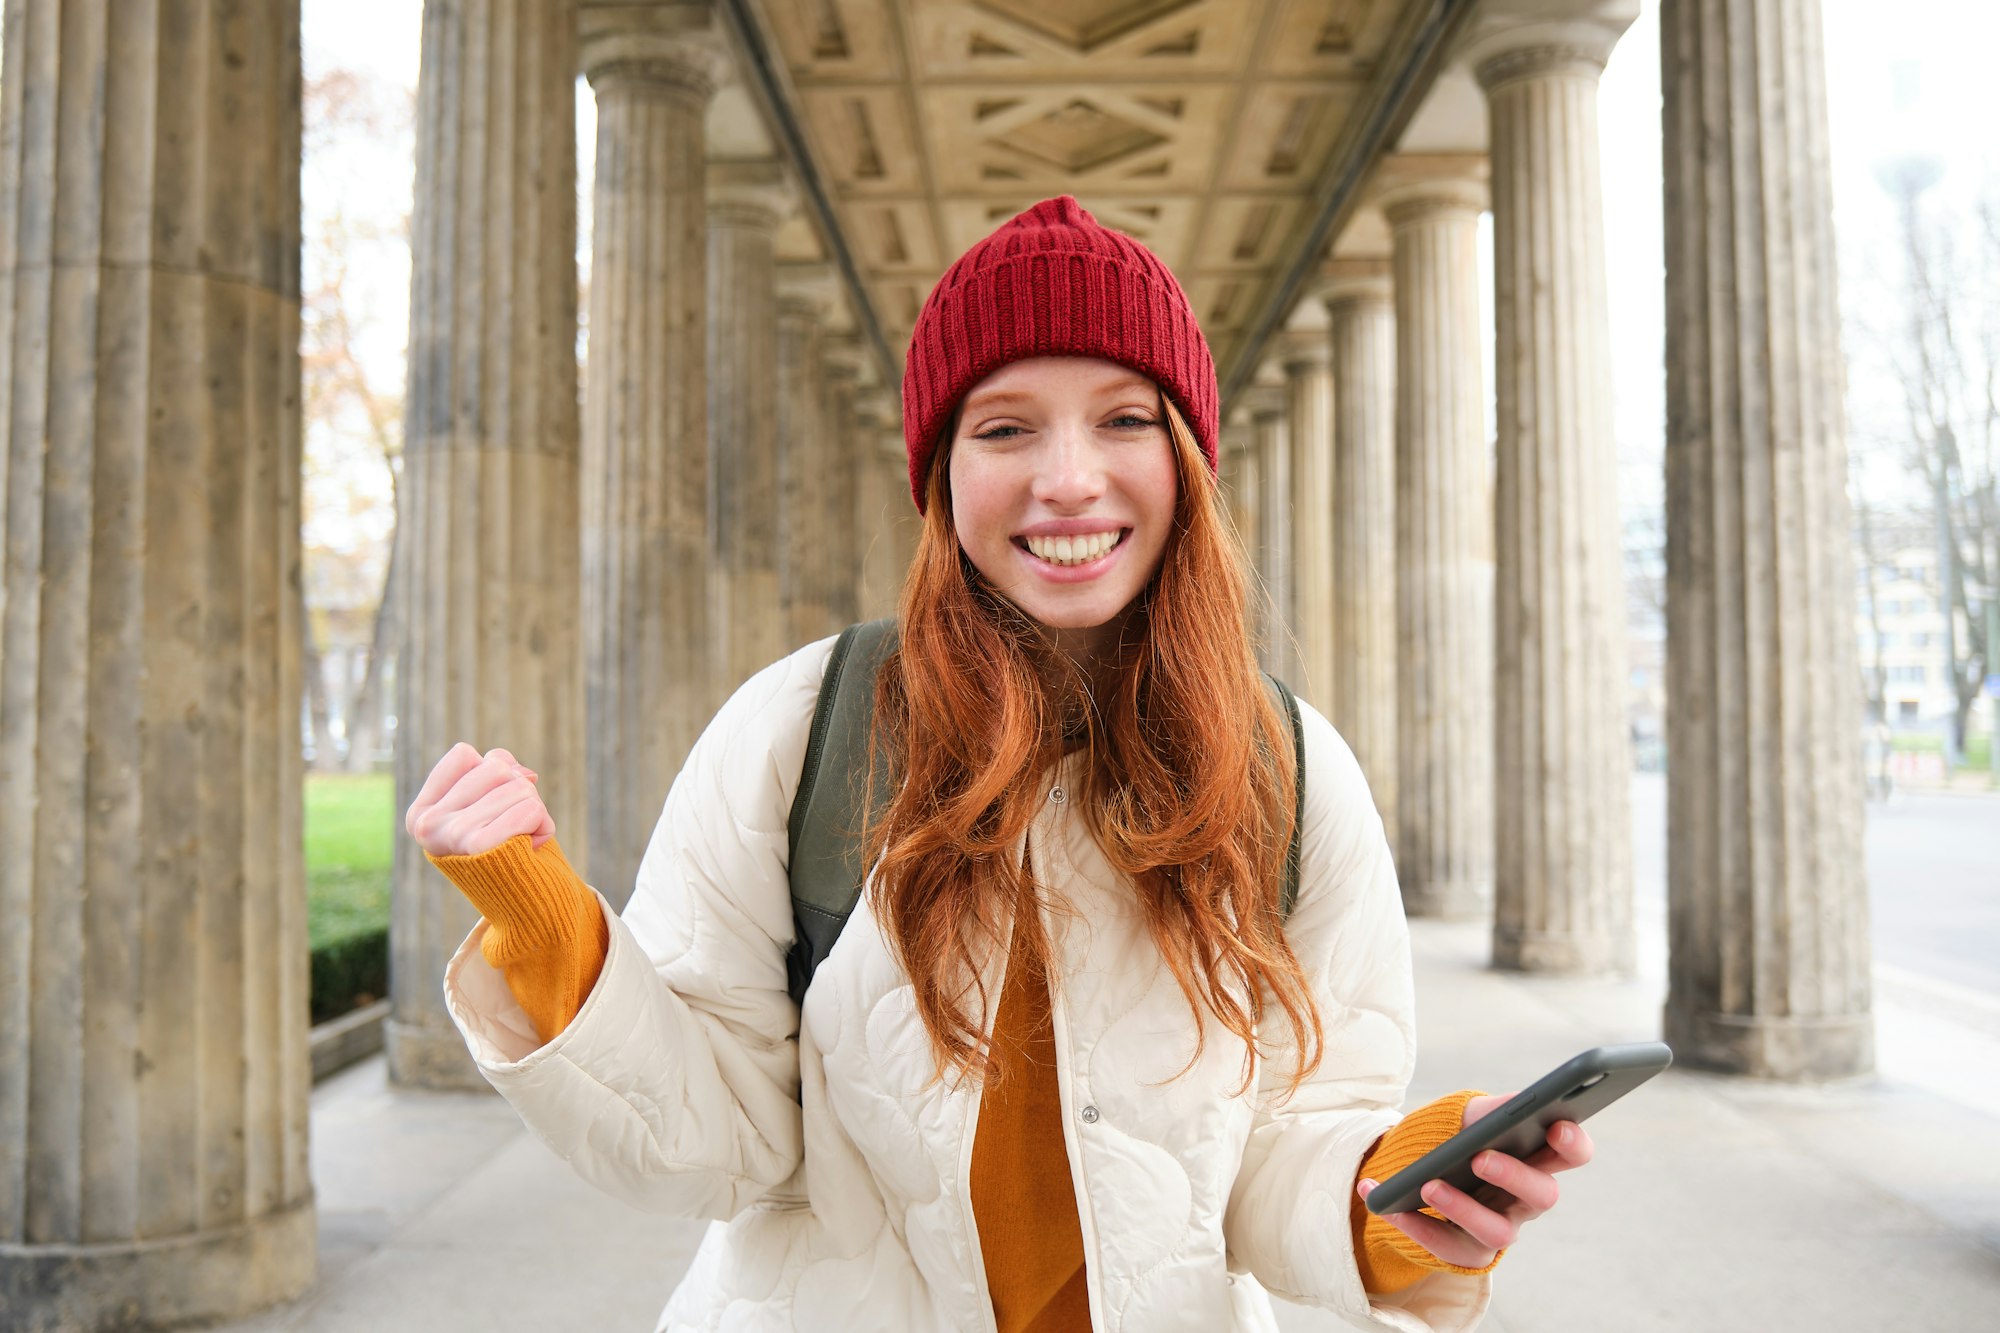 Mobile broadband and people. Smiling redhead 20s girl with backpack, uses smartphone on street